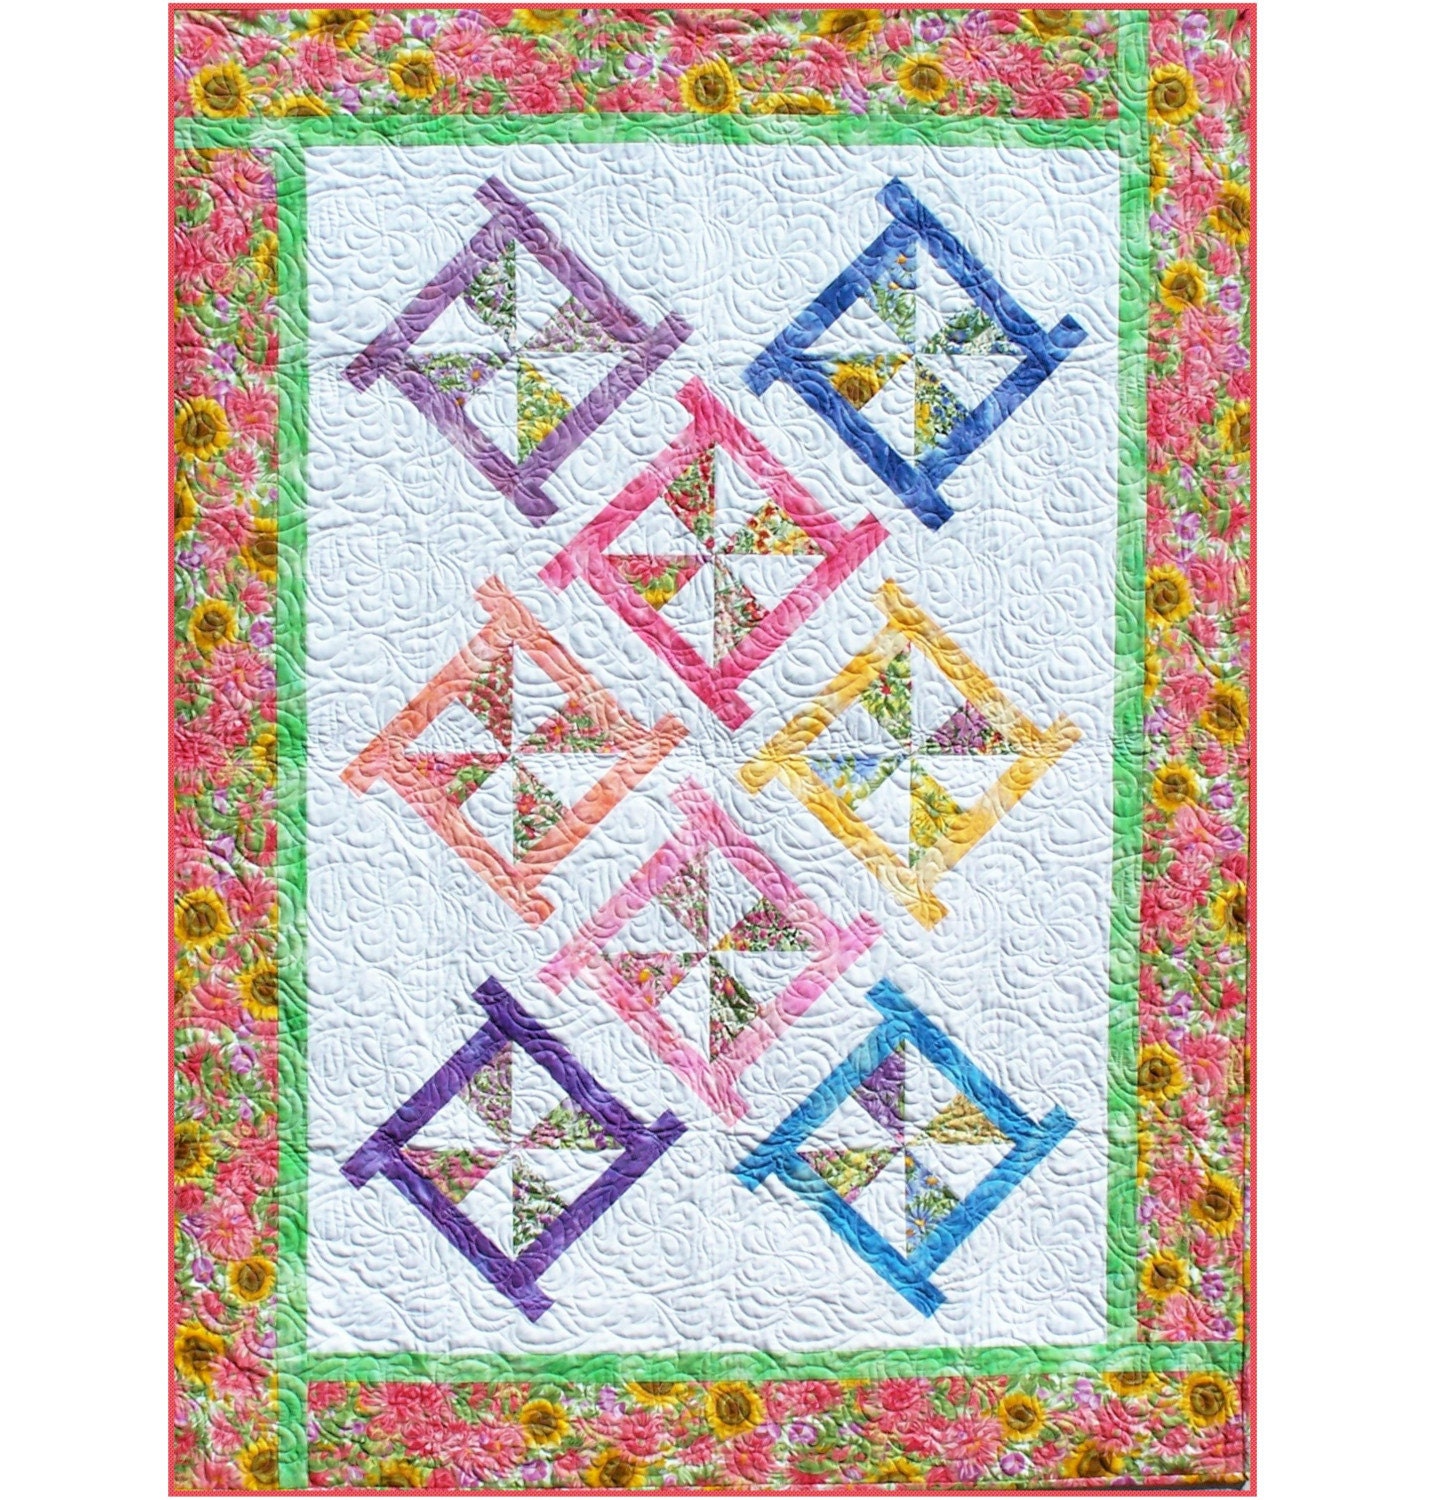 free-quilting-templates-to-print-9-free-printable-quilt-stencils-favequilts-thank-you